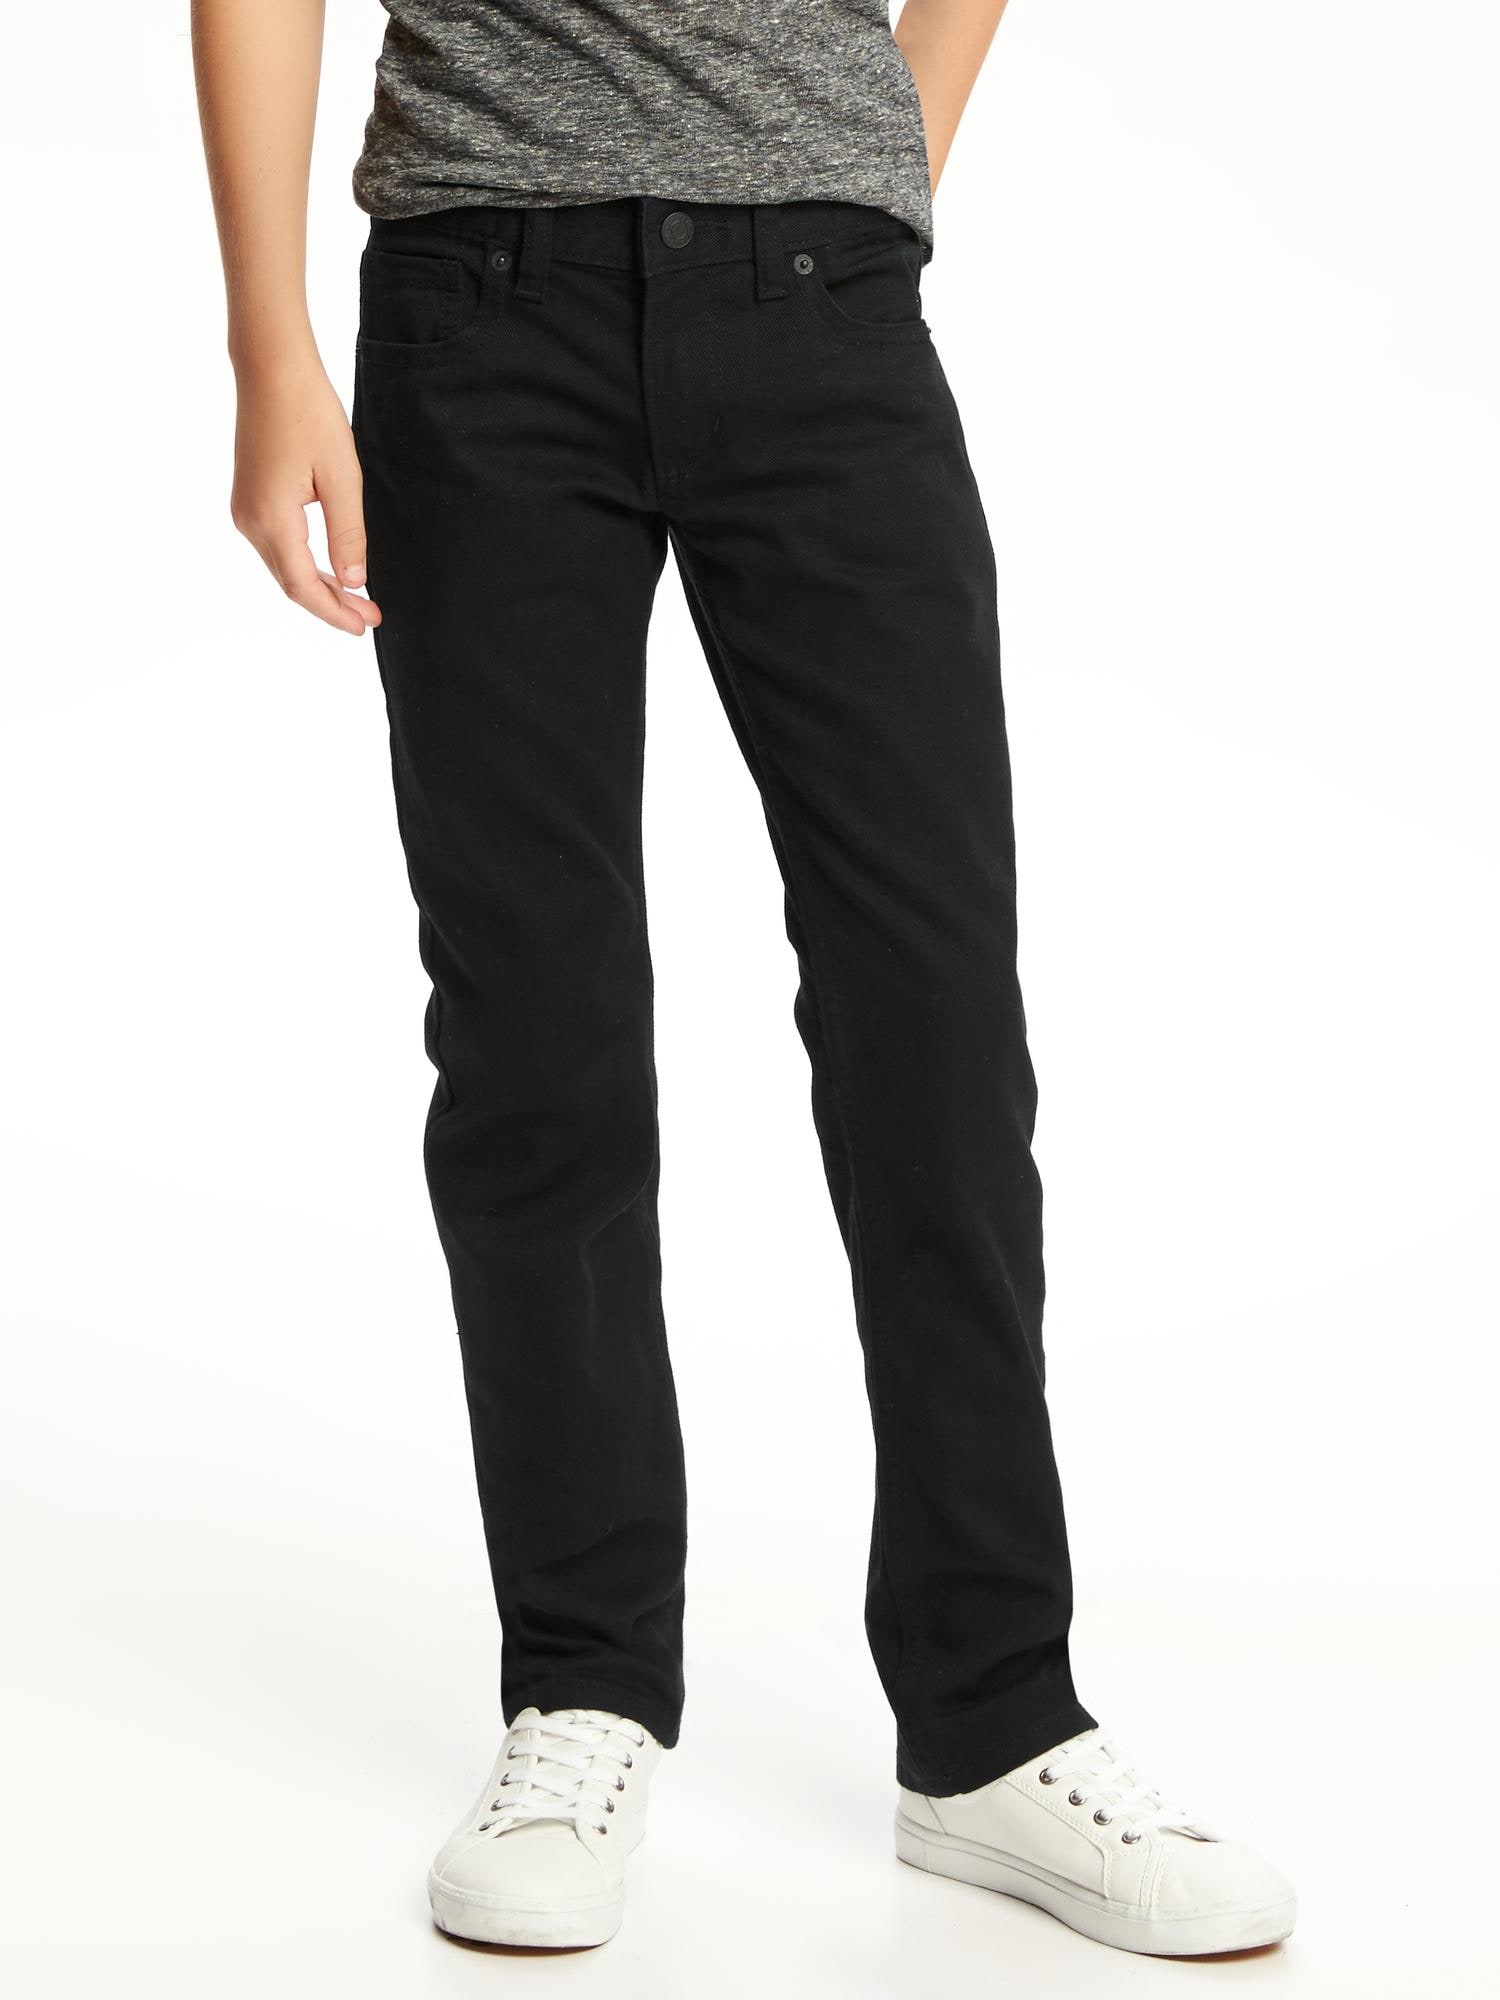 *Hot Deal* Skinny Non-Stretch Jeans for Boys